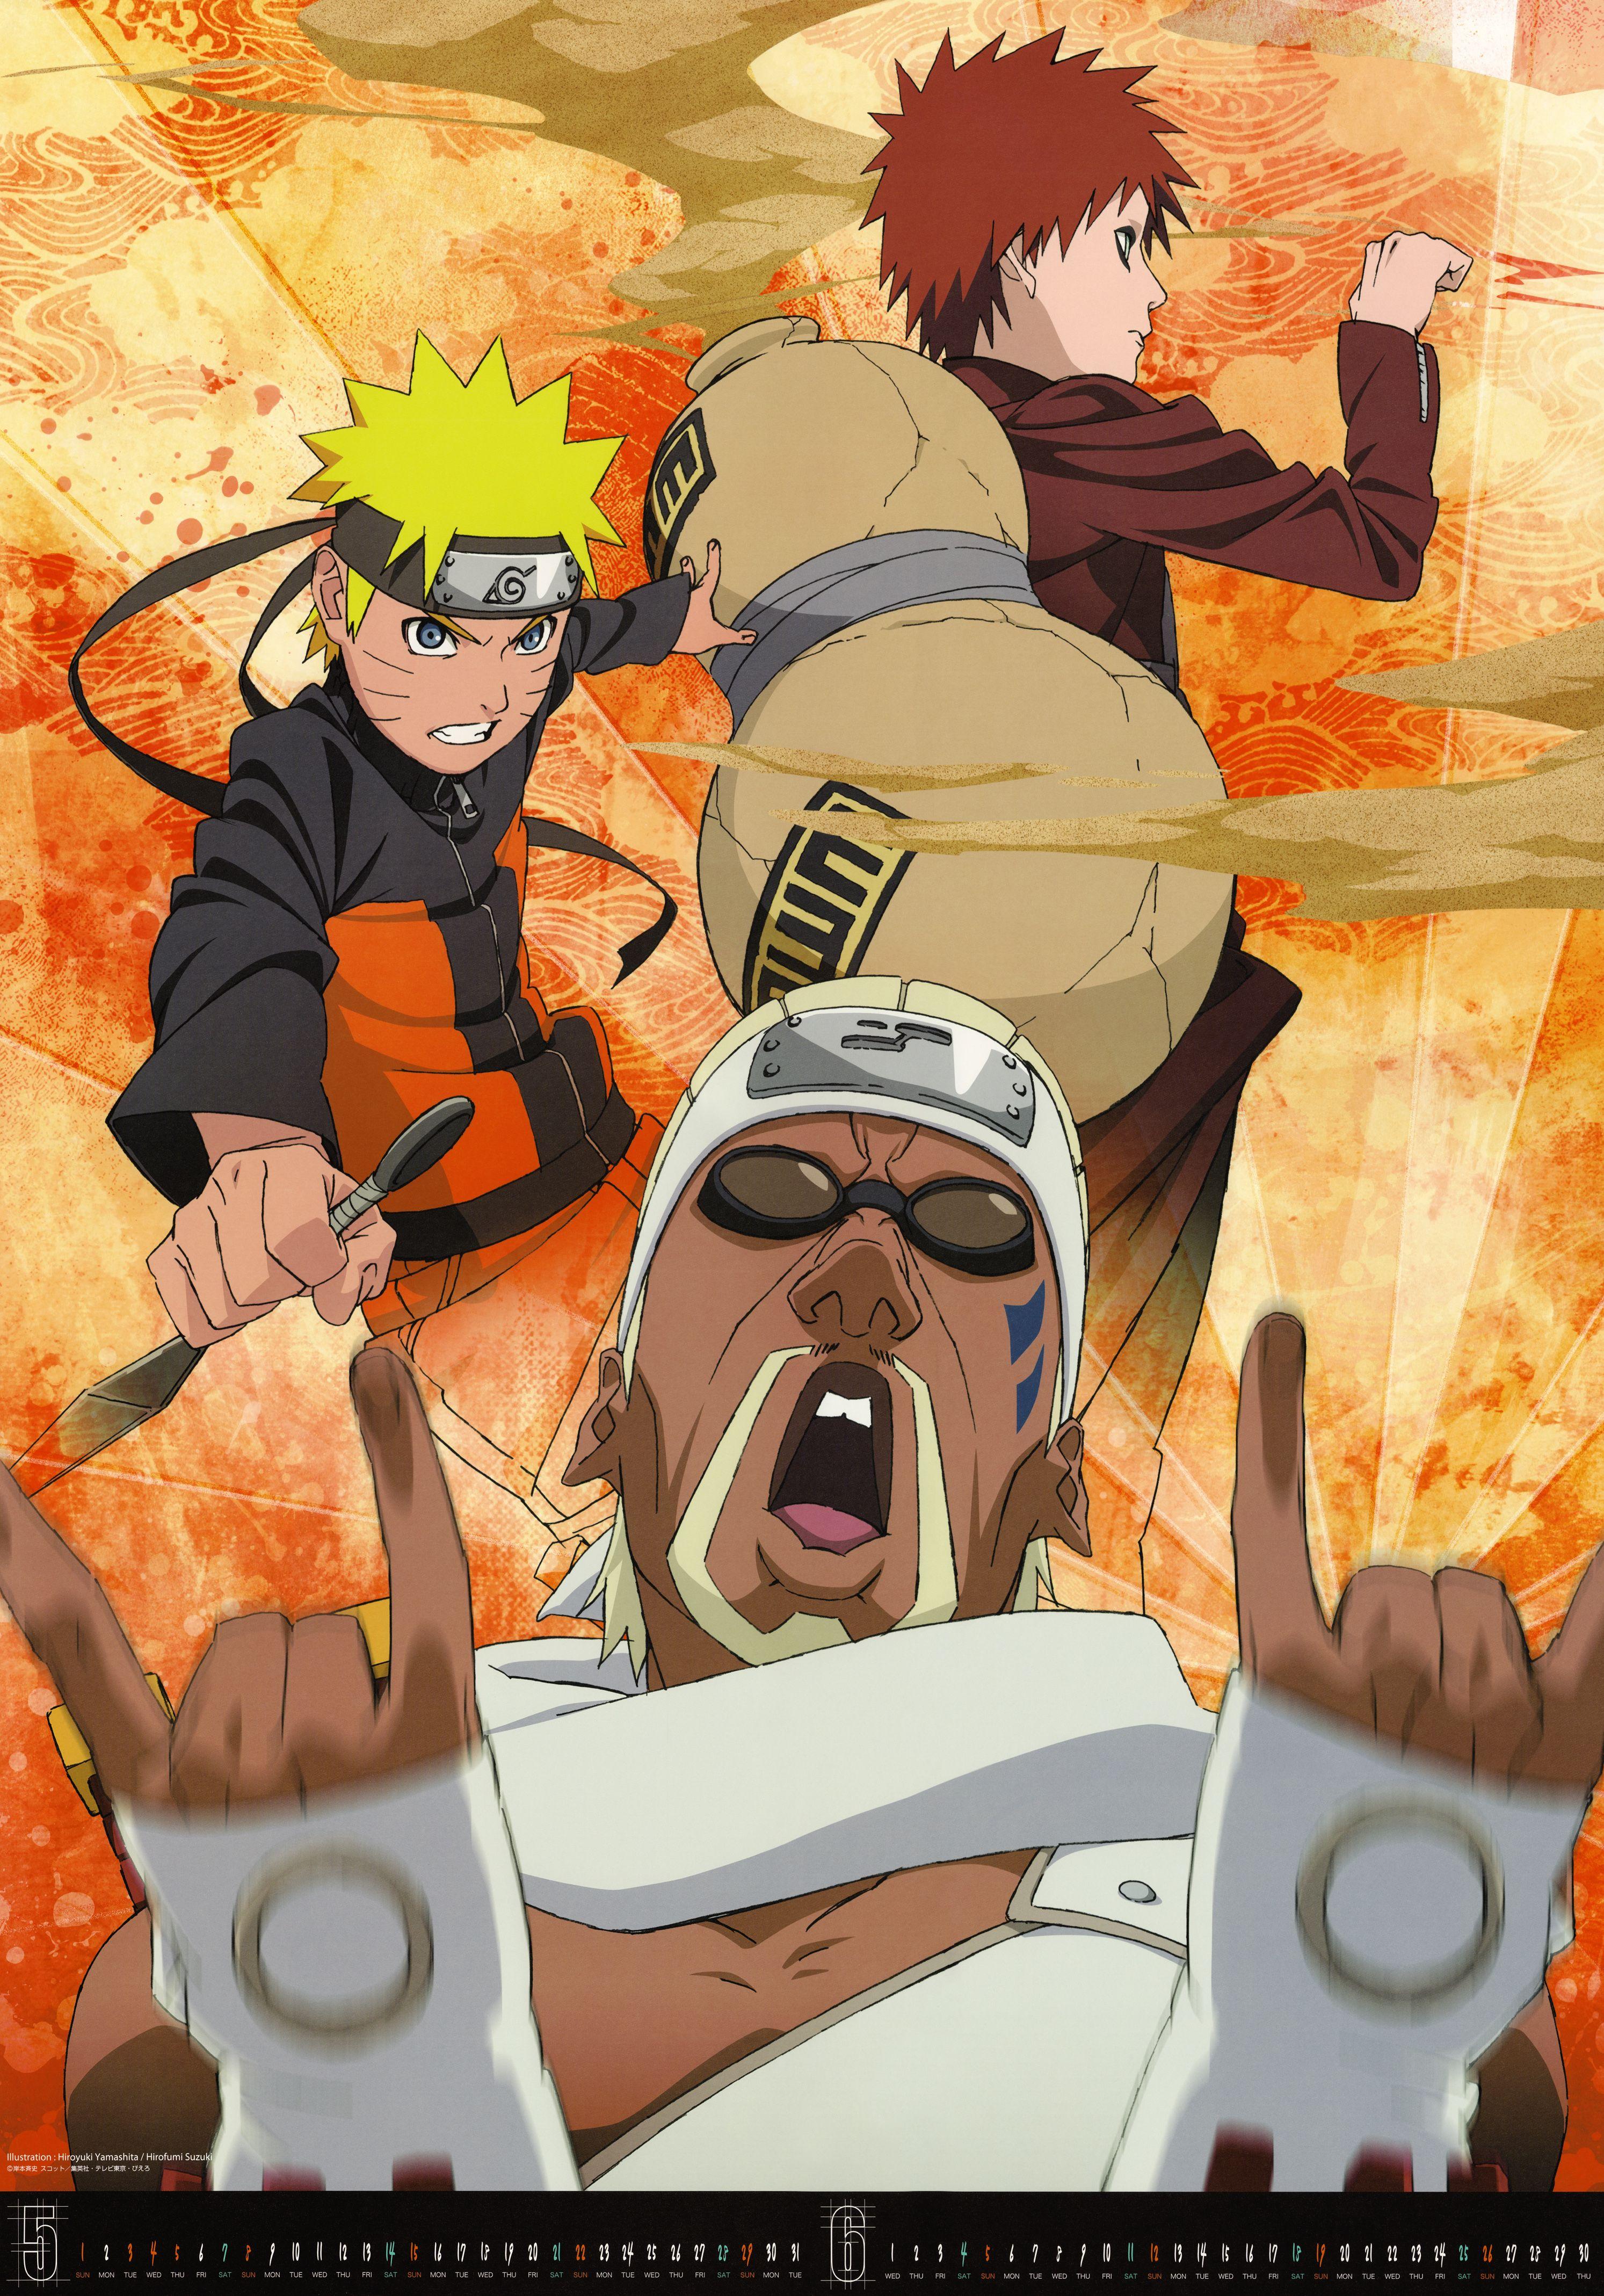 Who is Killer B in Naruto